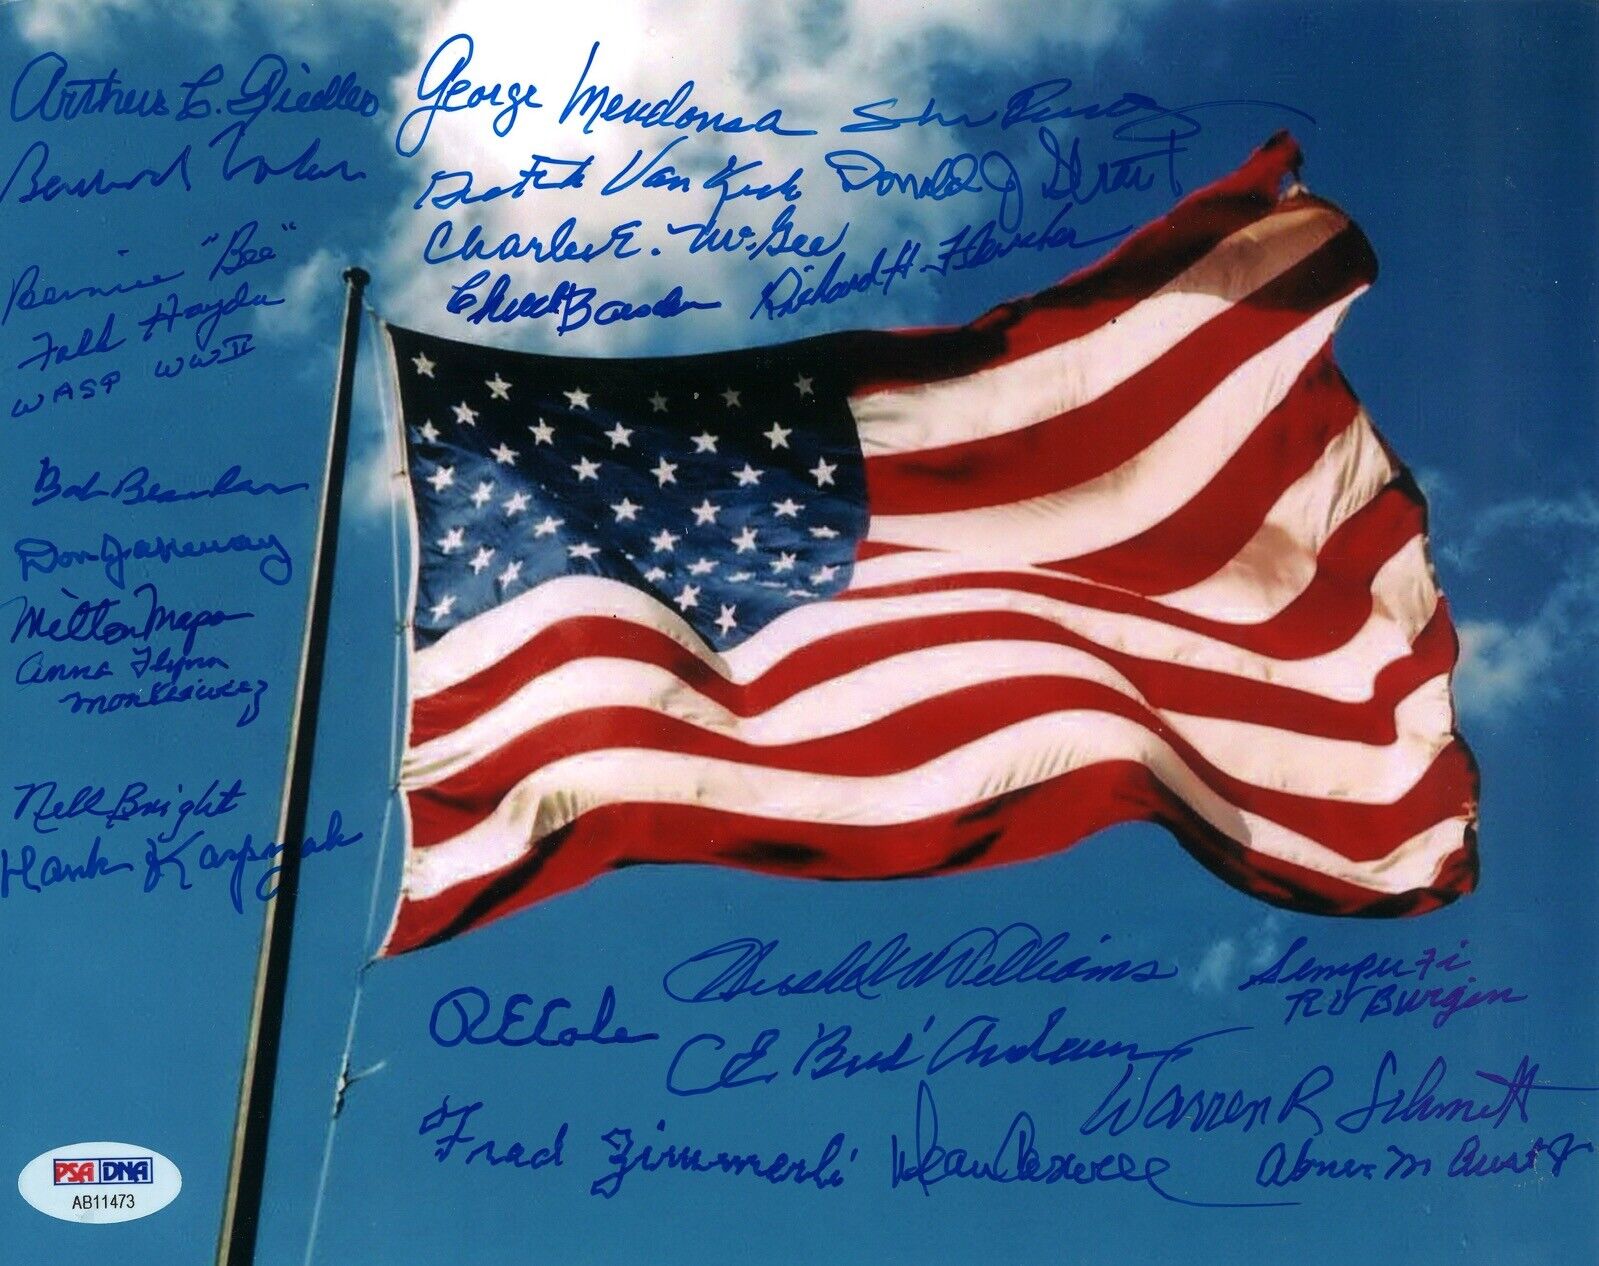 WWII VETERANS MULTI SIGNED 8X10 PHOTO PSA DNA AB11473 X24 ACES D-DAY WASP VETS